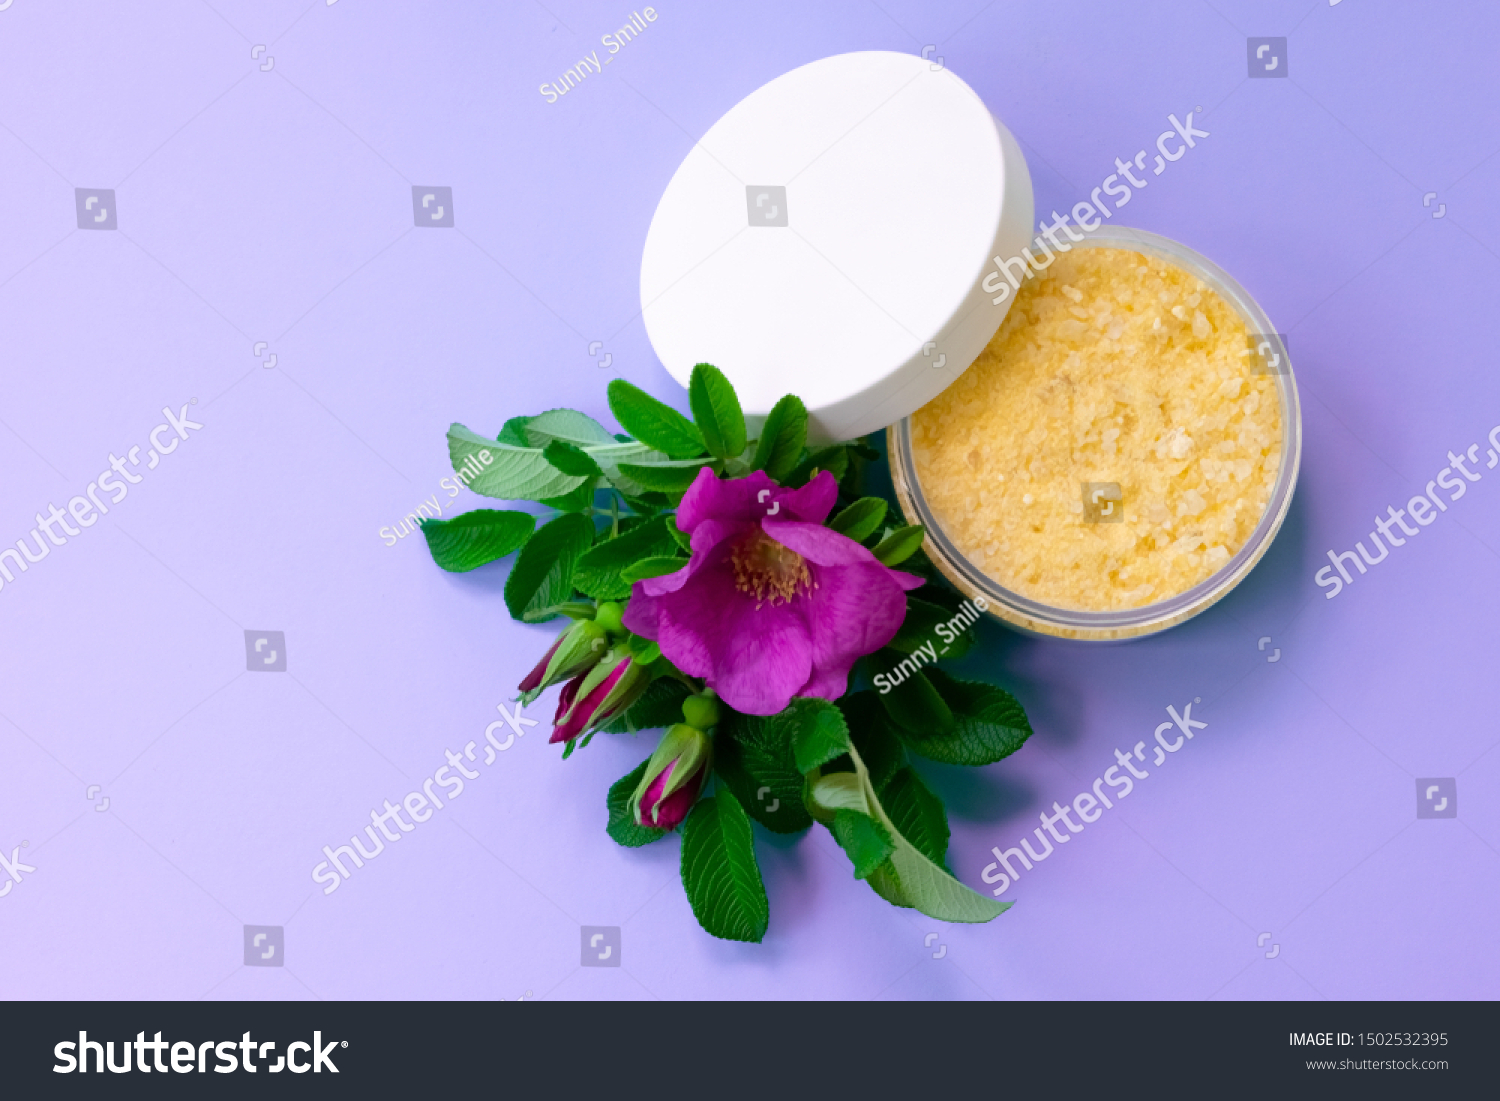 Download Opened Jar Pale Yellow Sea Salt Stock Photo Edit Now 1502532395 Yellowimages Mockups